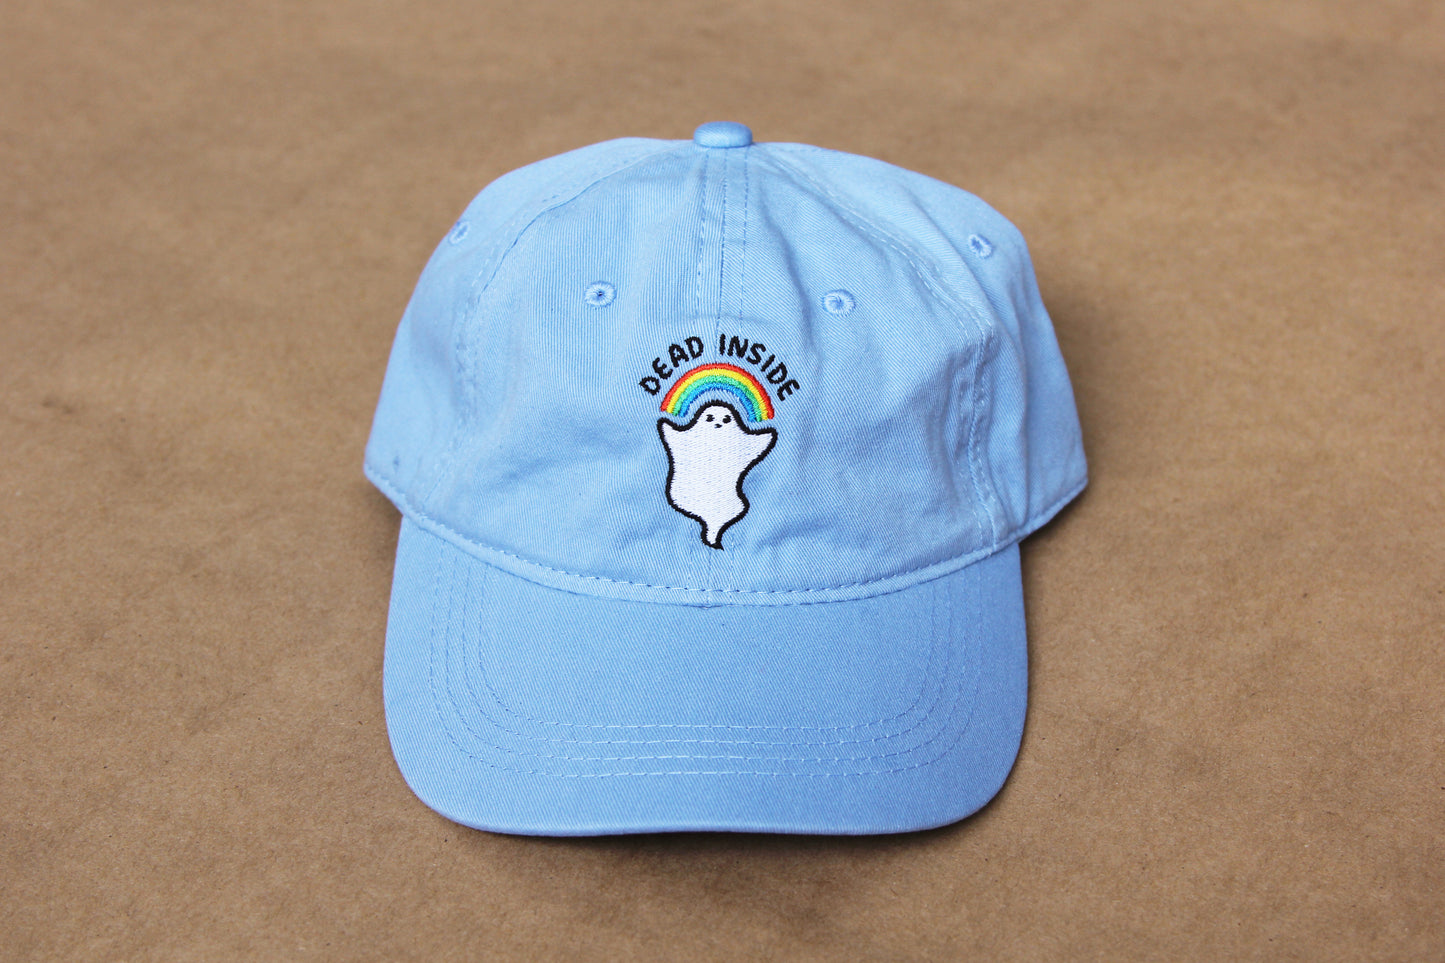 A photo of a light blue colored dad hat with an embroidered rainbow and ghost that says "Dead Inside" over a tan background.